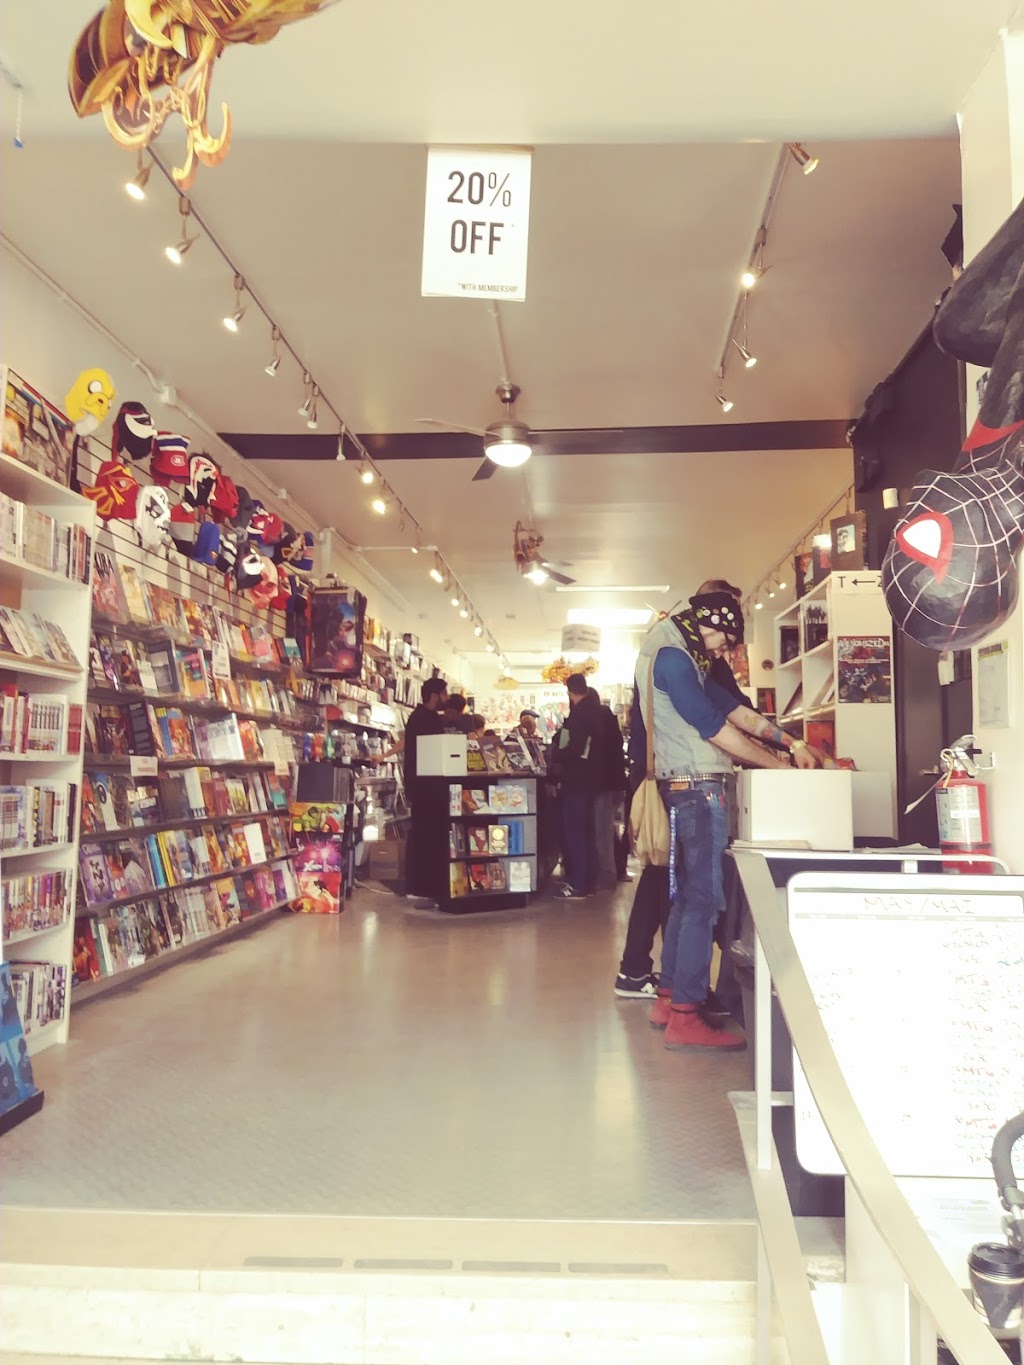 Crossover Comics | book store | 3560 Notre-Dame St W, Montreal, Quebec H4C 1P4, Canada | 5142847373 OR +1 514-284-7373